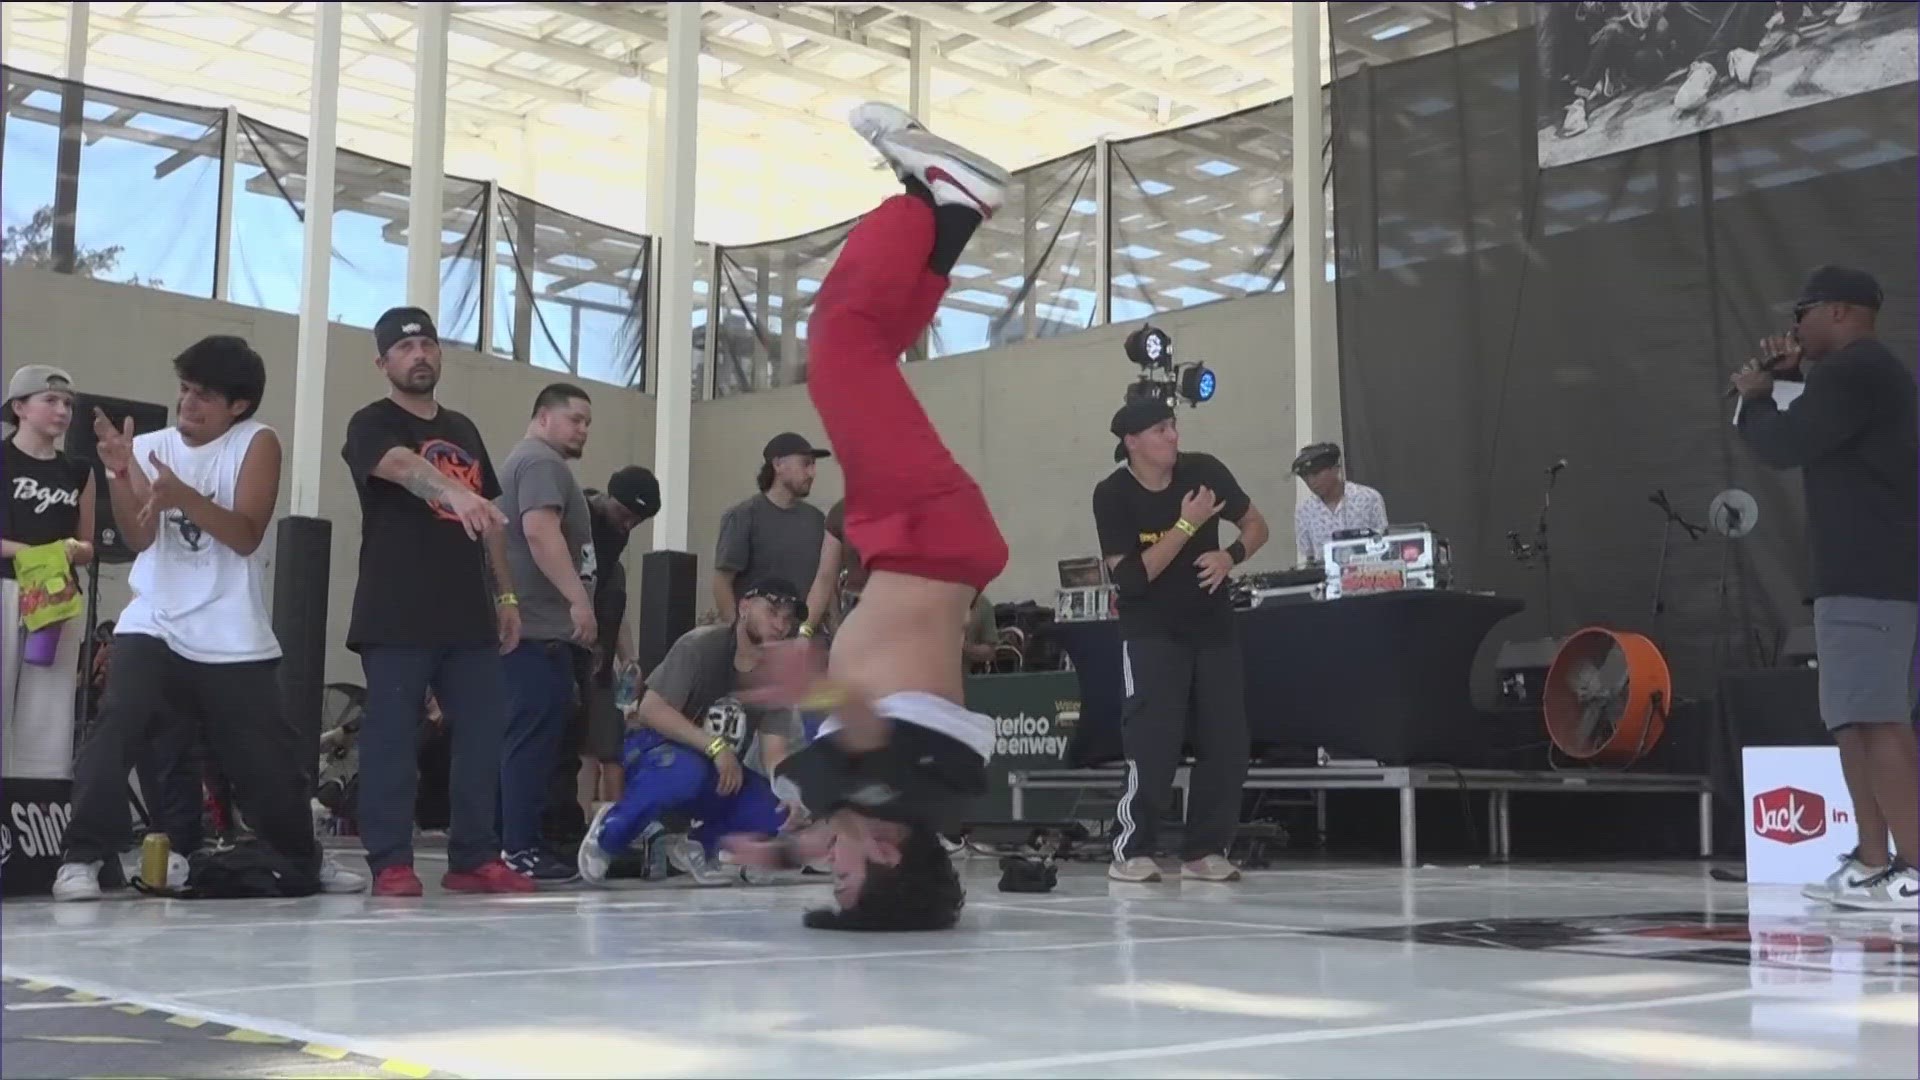 Dancers are competing for the finals of a national breakdancing competition in Austin. The sport is growing and will now be part of the Olympics.